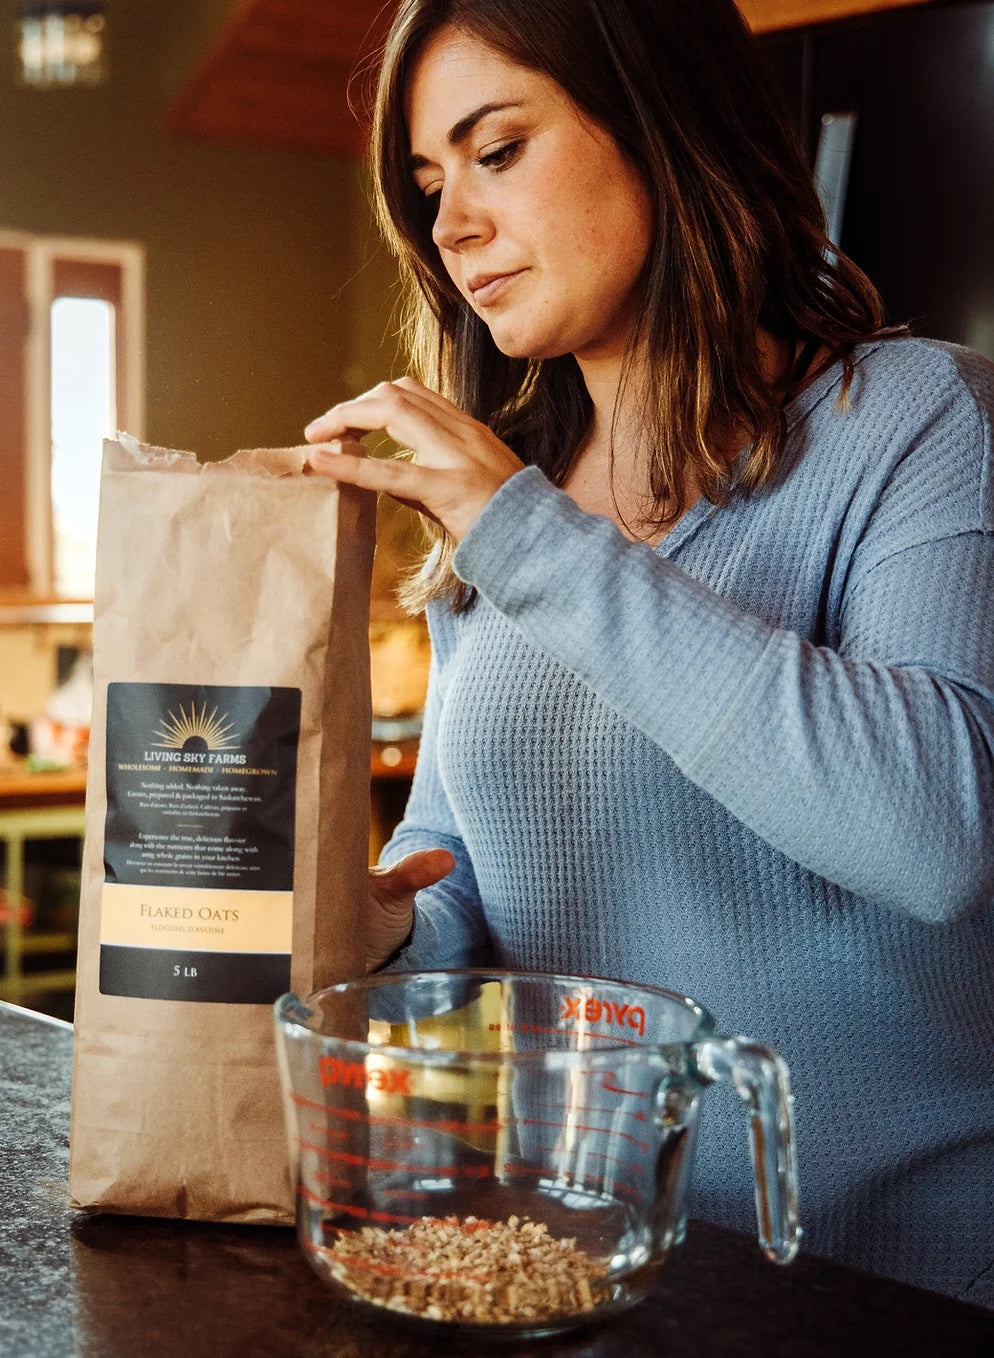 In a sunny kitchen, Sarah is wearing a blue sweater as she pours a bag of her flaked oats into a 5-cup measure. 